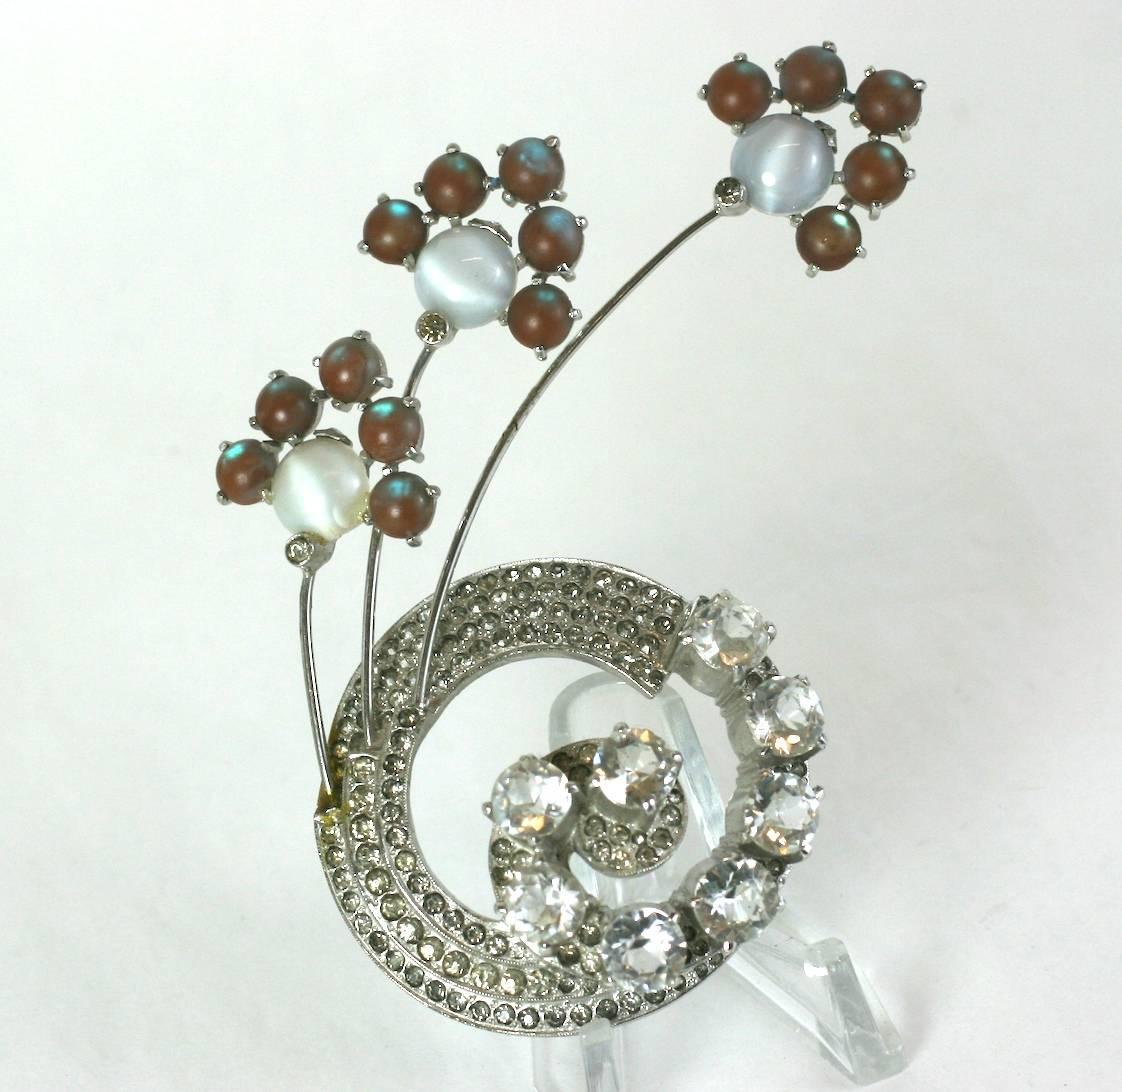 Unusual dimensional Reja crystal pave Retro swirl brooch incorporating Czechoslovakian Saphiret glass cabochons and faux moonstones. Large amazing scale. 
Unsigned. Excellent condition. 
4.5